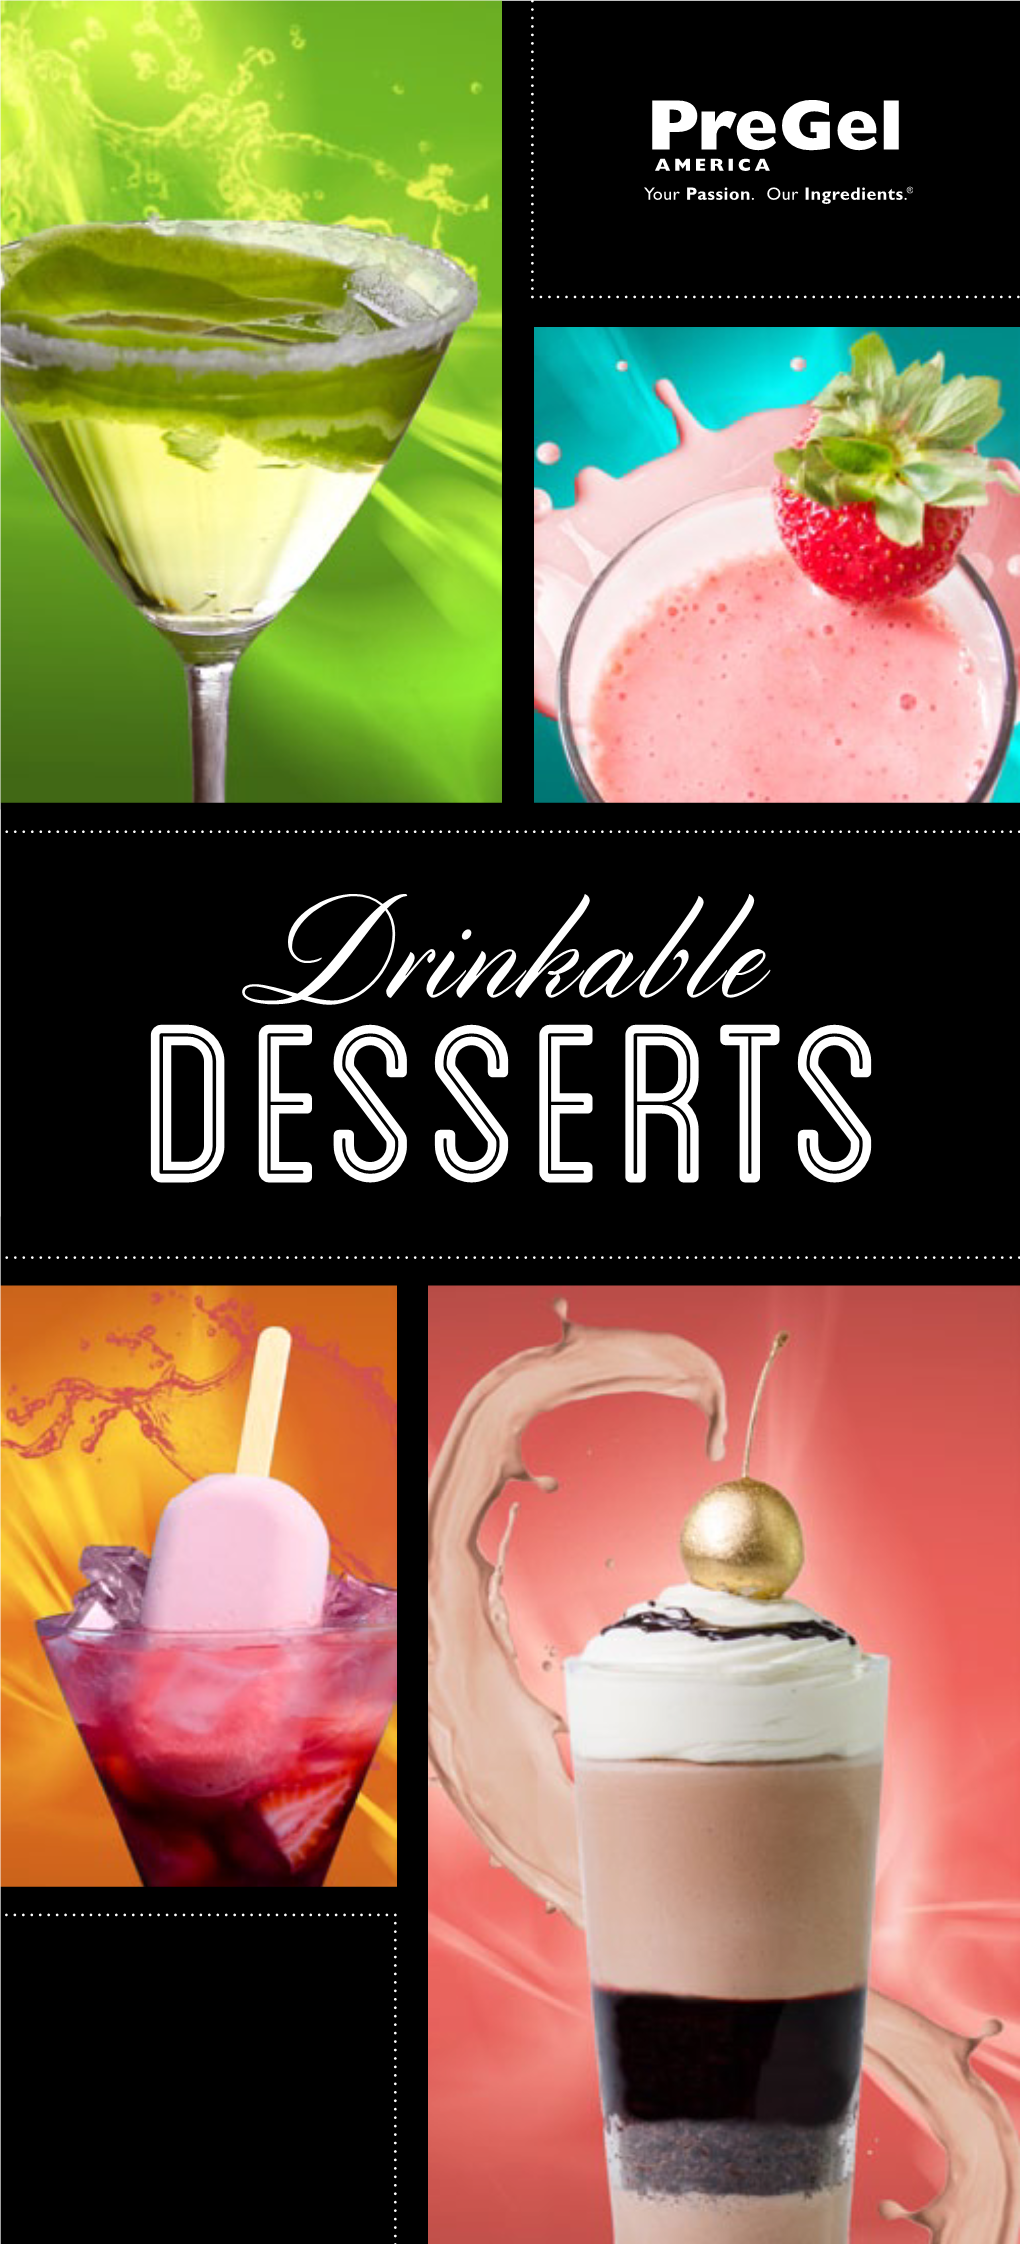 Drinkable Sweetssip Your Decadent Dessert Beverages Are an Up-And-Coming Trend Offering Consumers a Playful Way to Eat Their Sweets